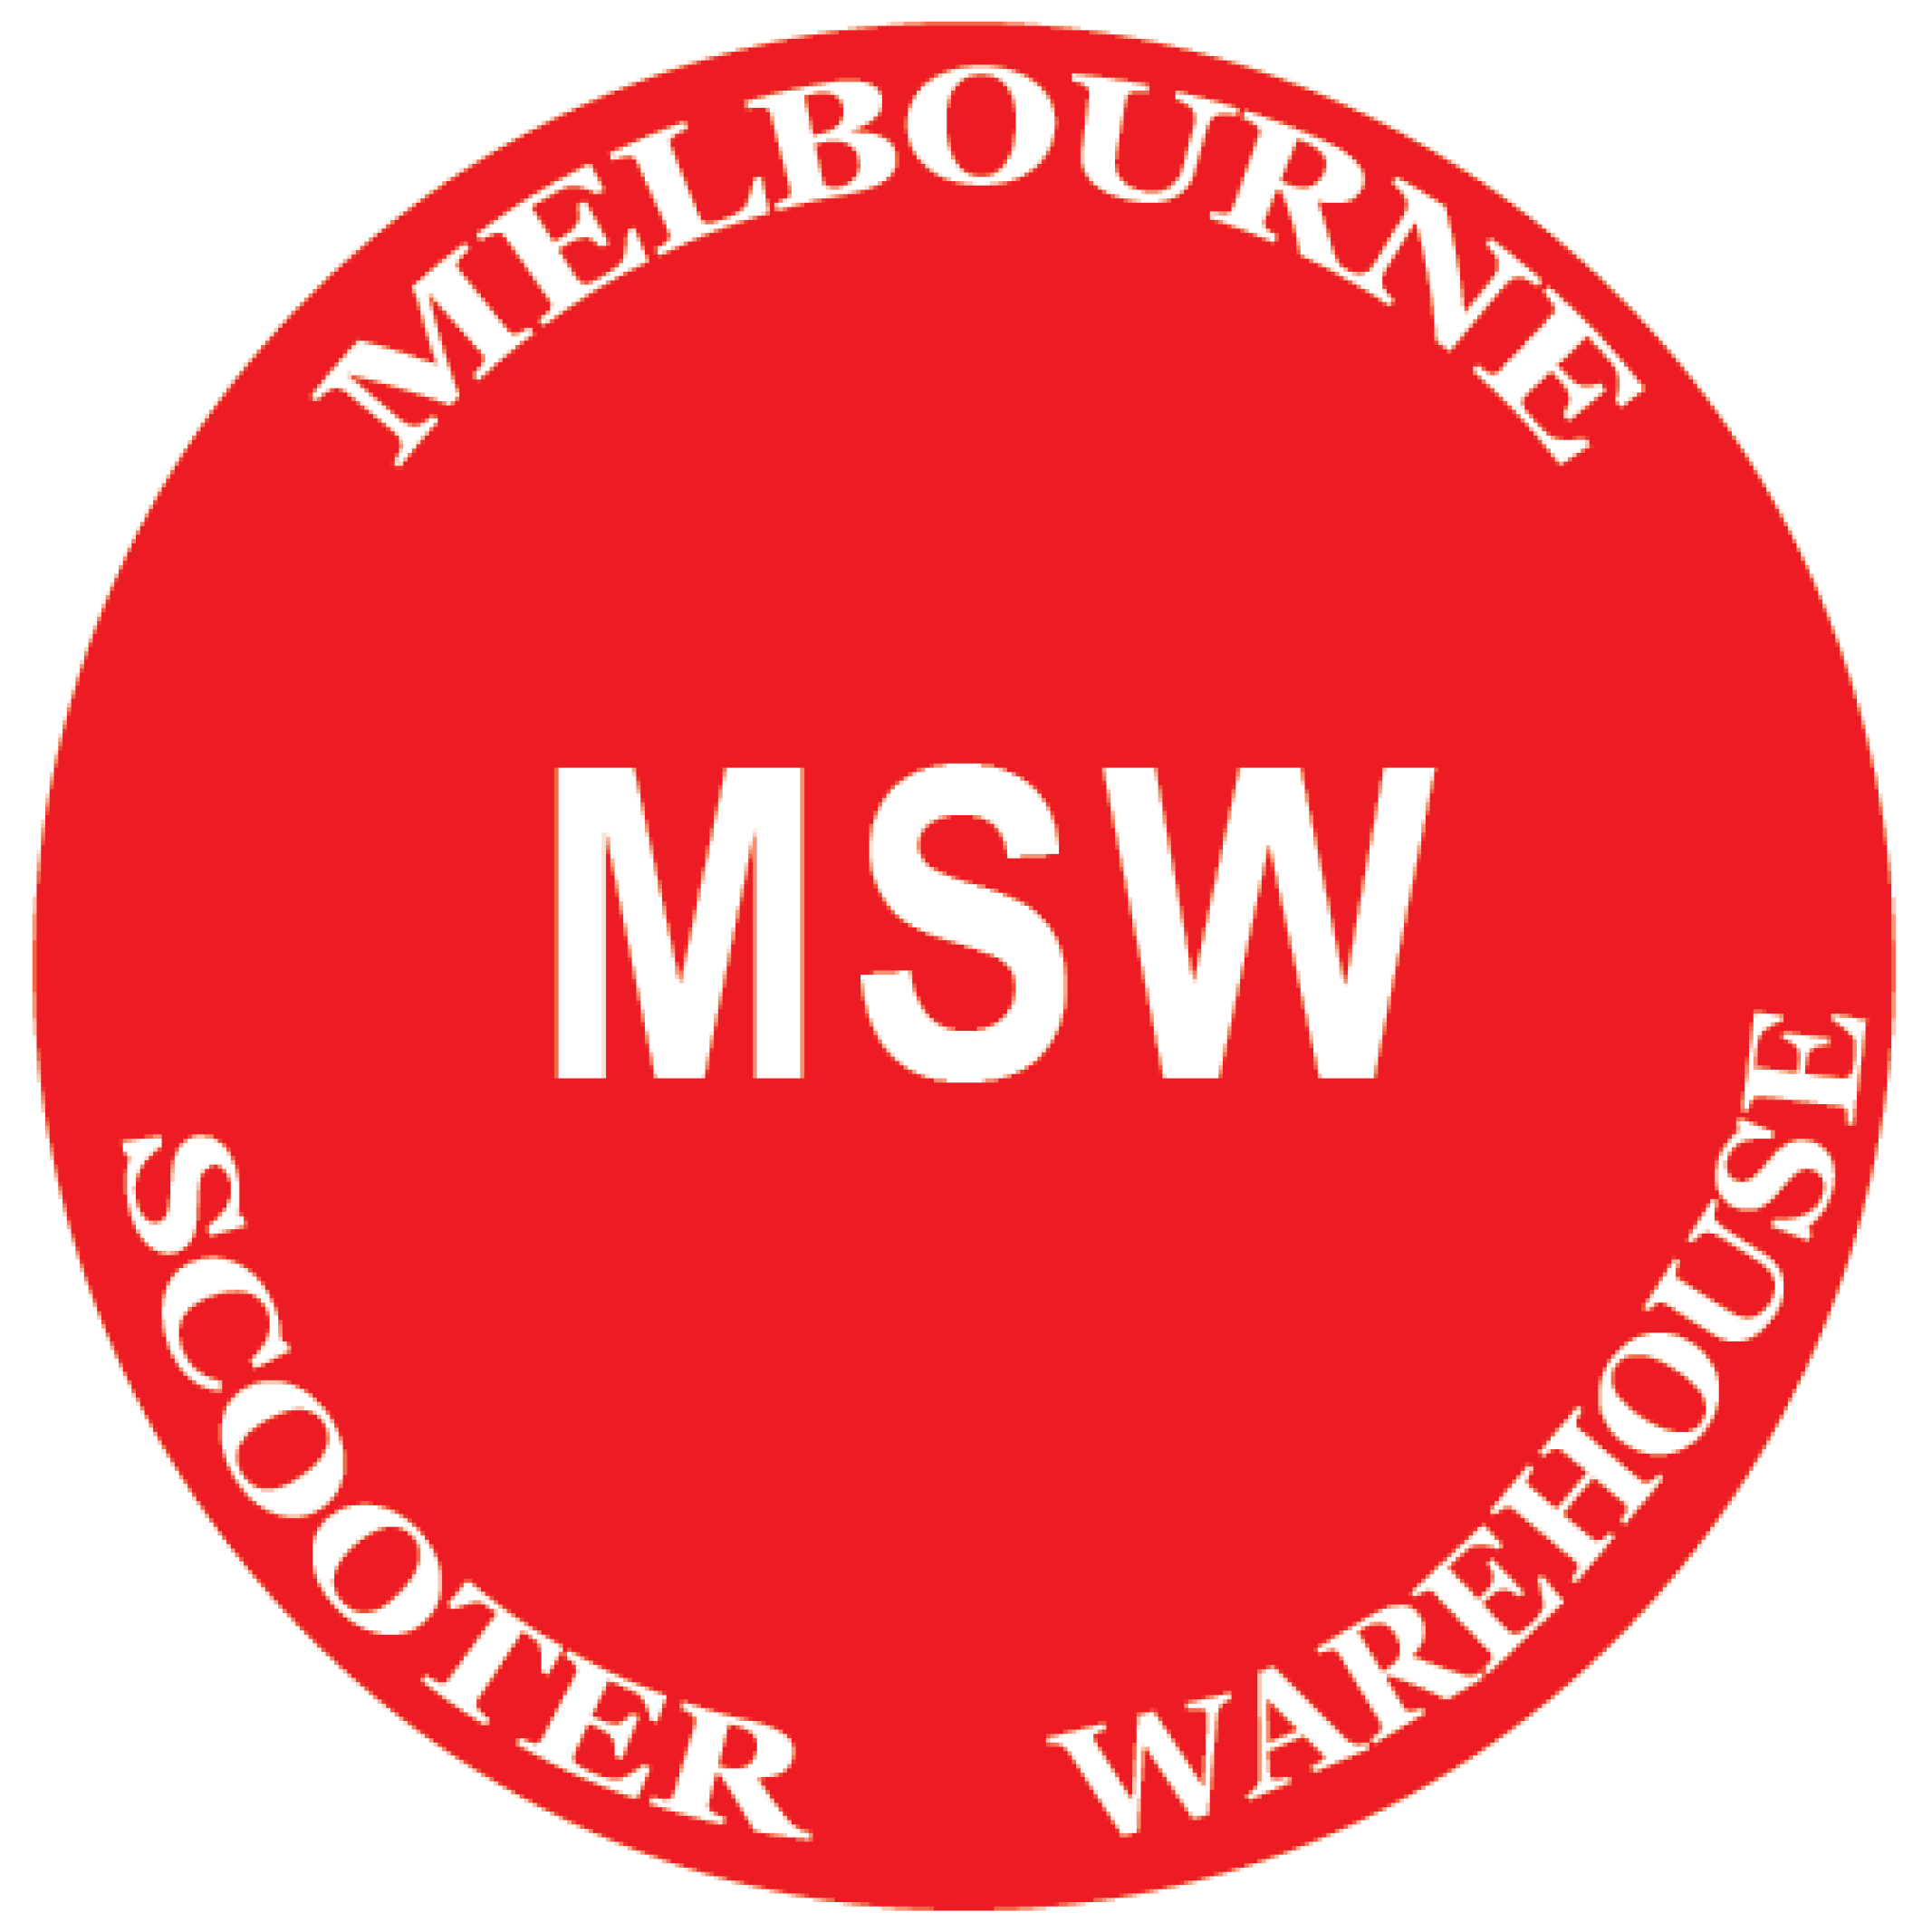 Melbourne scooters - Melbourne Scooter Warehouse - Motor scooters Melbourne - 50cc scooter - Melbourne moped scooters - Australian motor scooters - Second hand scooters Melbourne - Sym scooters Melbourne - Family run business       